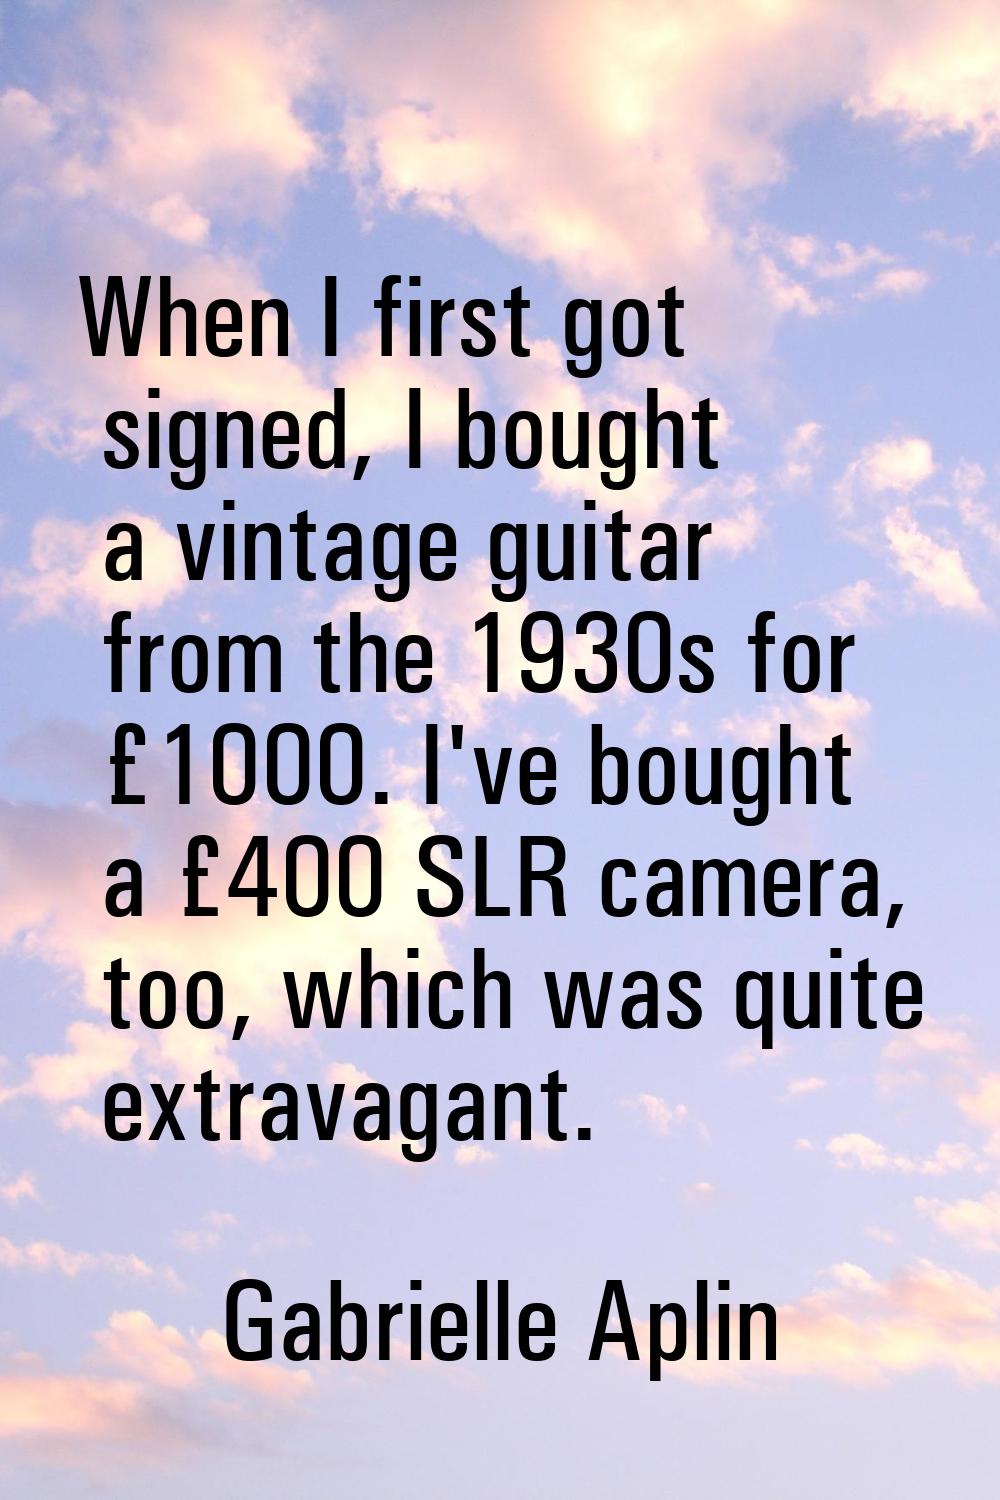 When I first got signed, I bought a vintage guitar from the 1930s for £1000. I've bought a £400 SLR